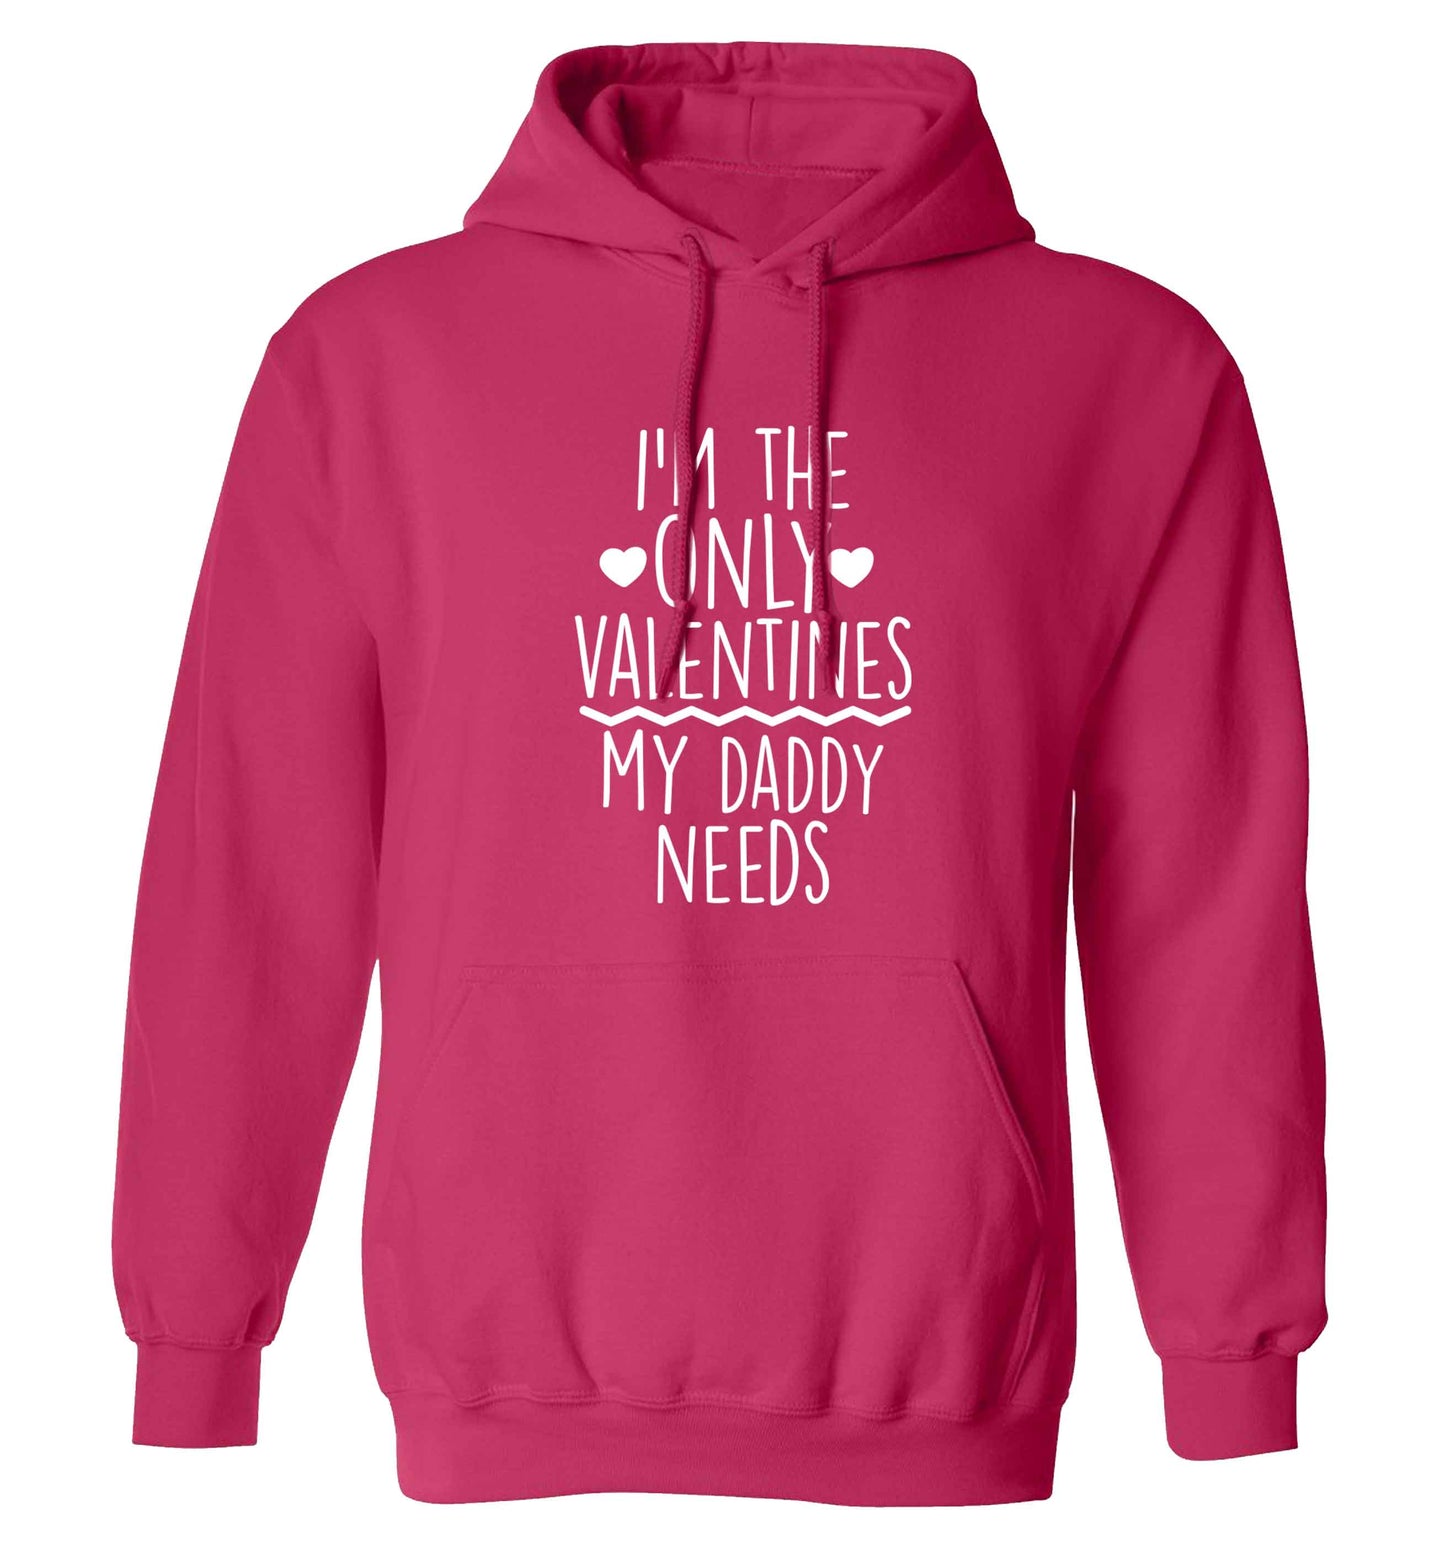 I'm the only valentines my daddy needs adults unisex pink hoodie 2XL